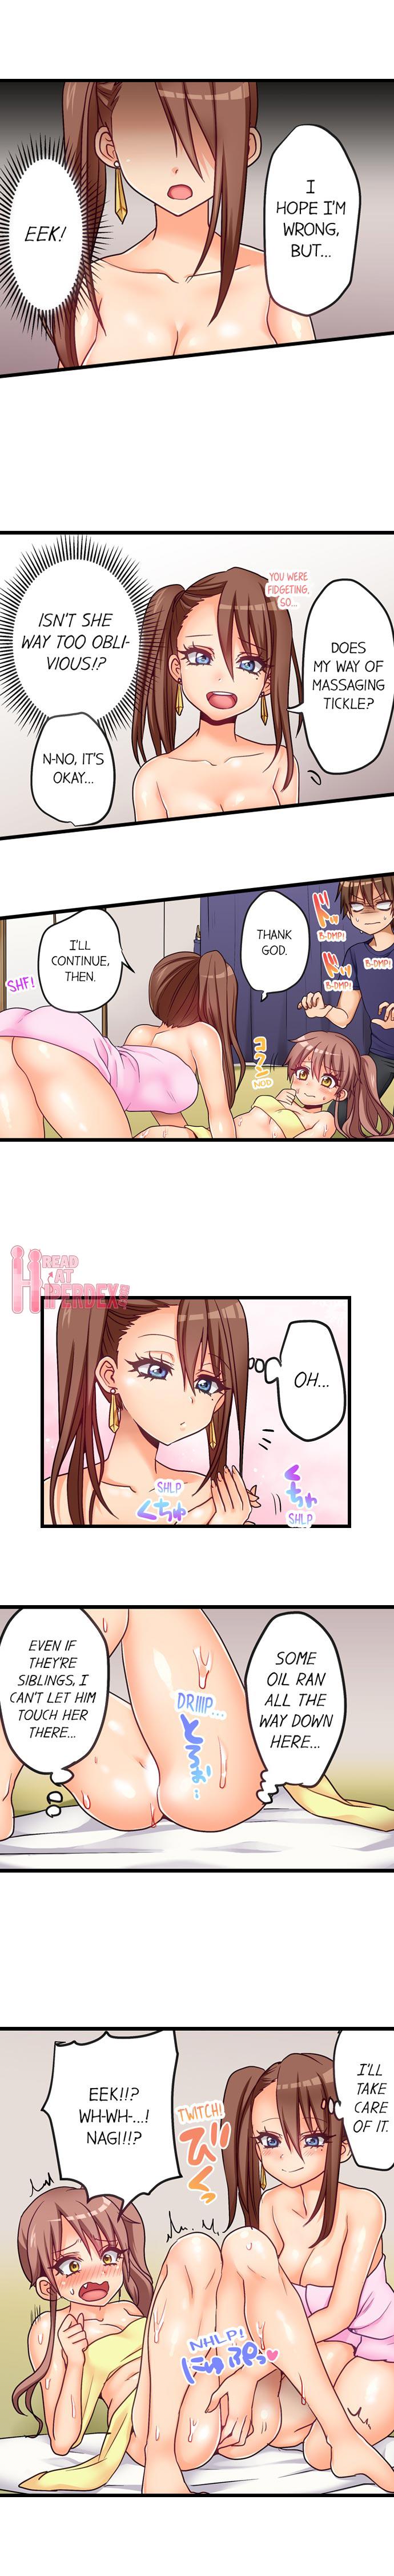 Real Sex Porori] My First Time is with.... My Little Sister?! - Original Ex Girlfriend - Page 5